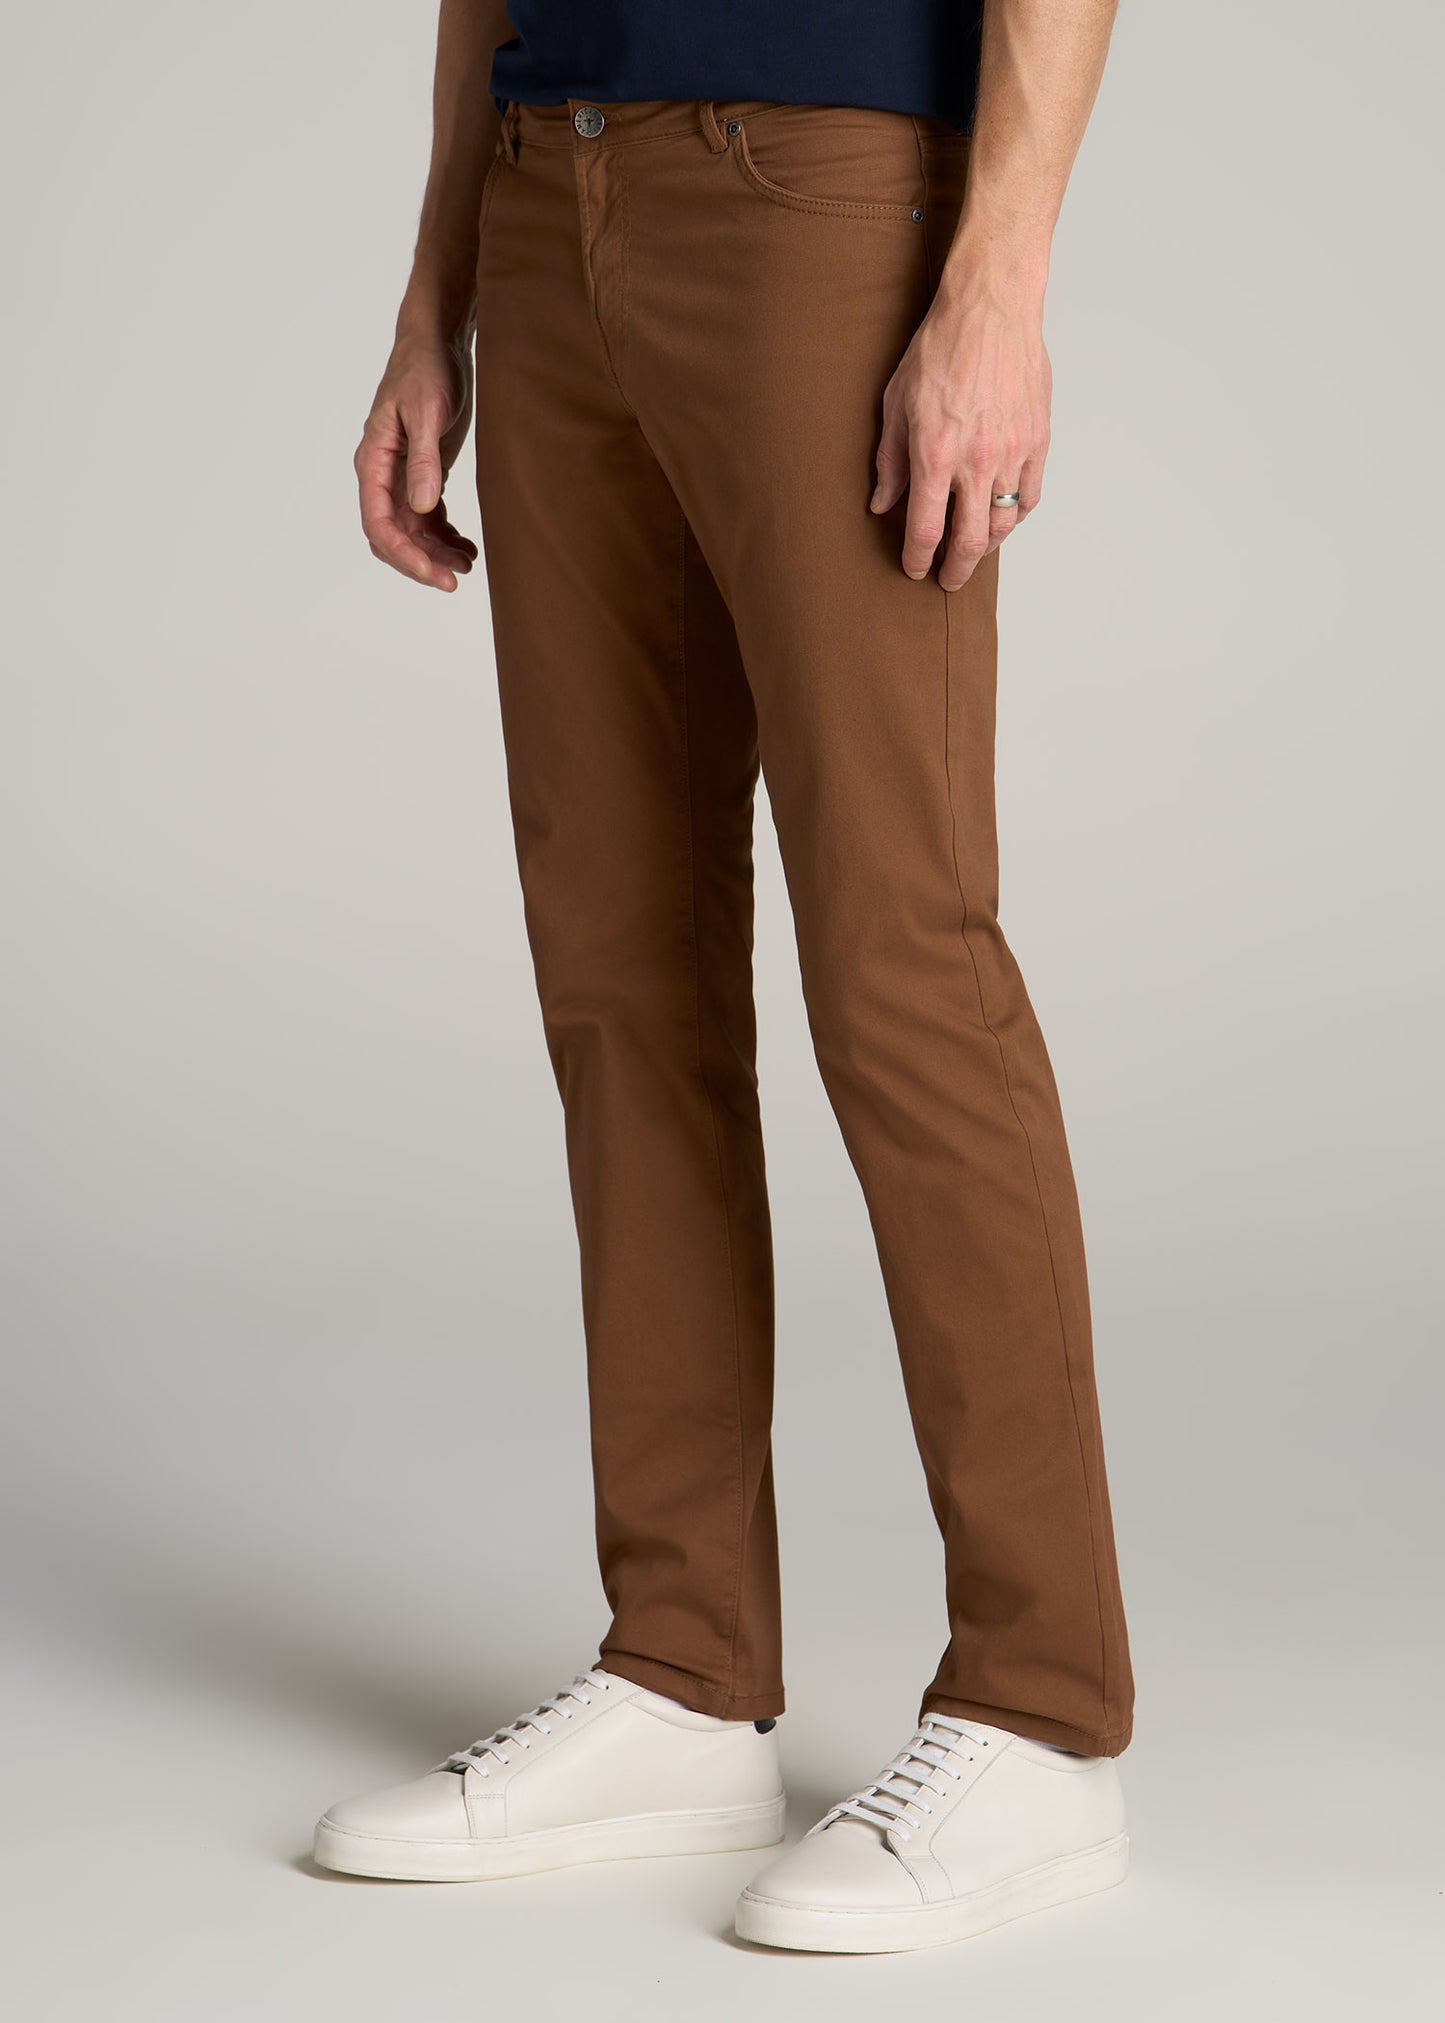 Carman Tapered Fit Five-Pocket Pant Men's in Nutshell